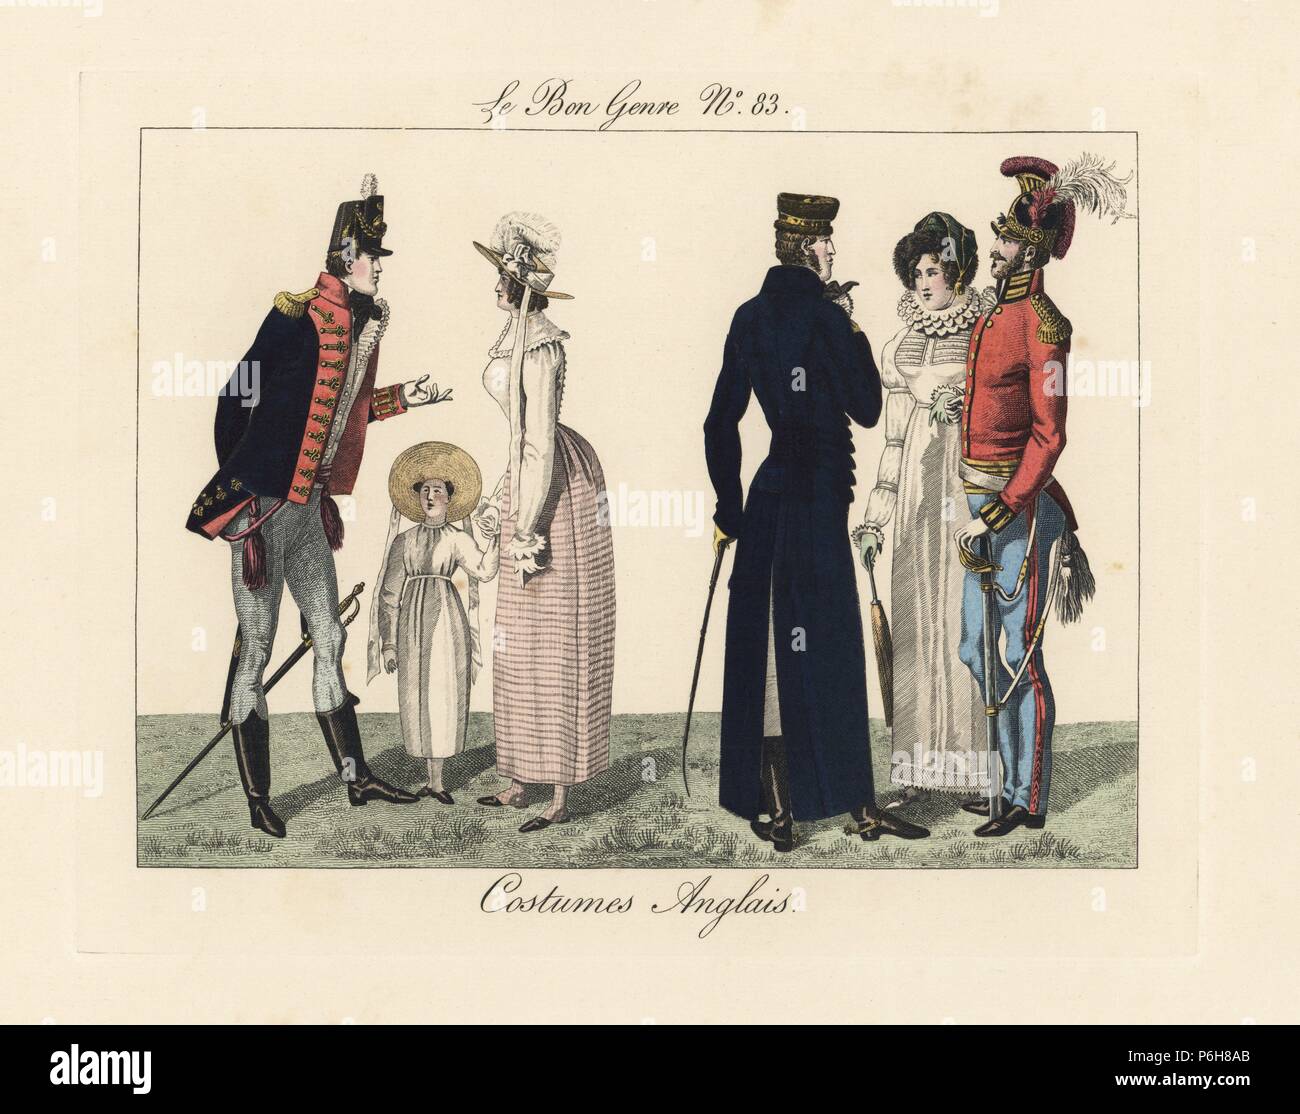 English fashions and military uniforms, 1815. One woman on the right wears French-influenced fashions, while talking with a hussar and dragoon. Handcoloured engraving from Pierre de la Mesangere's Le Bon Genre, Paris, 1817. Stock Photo